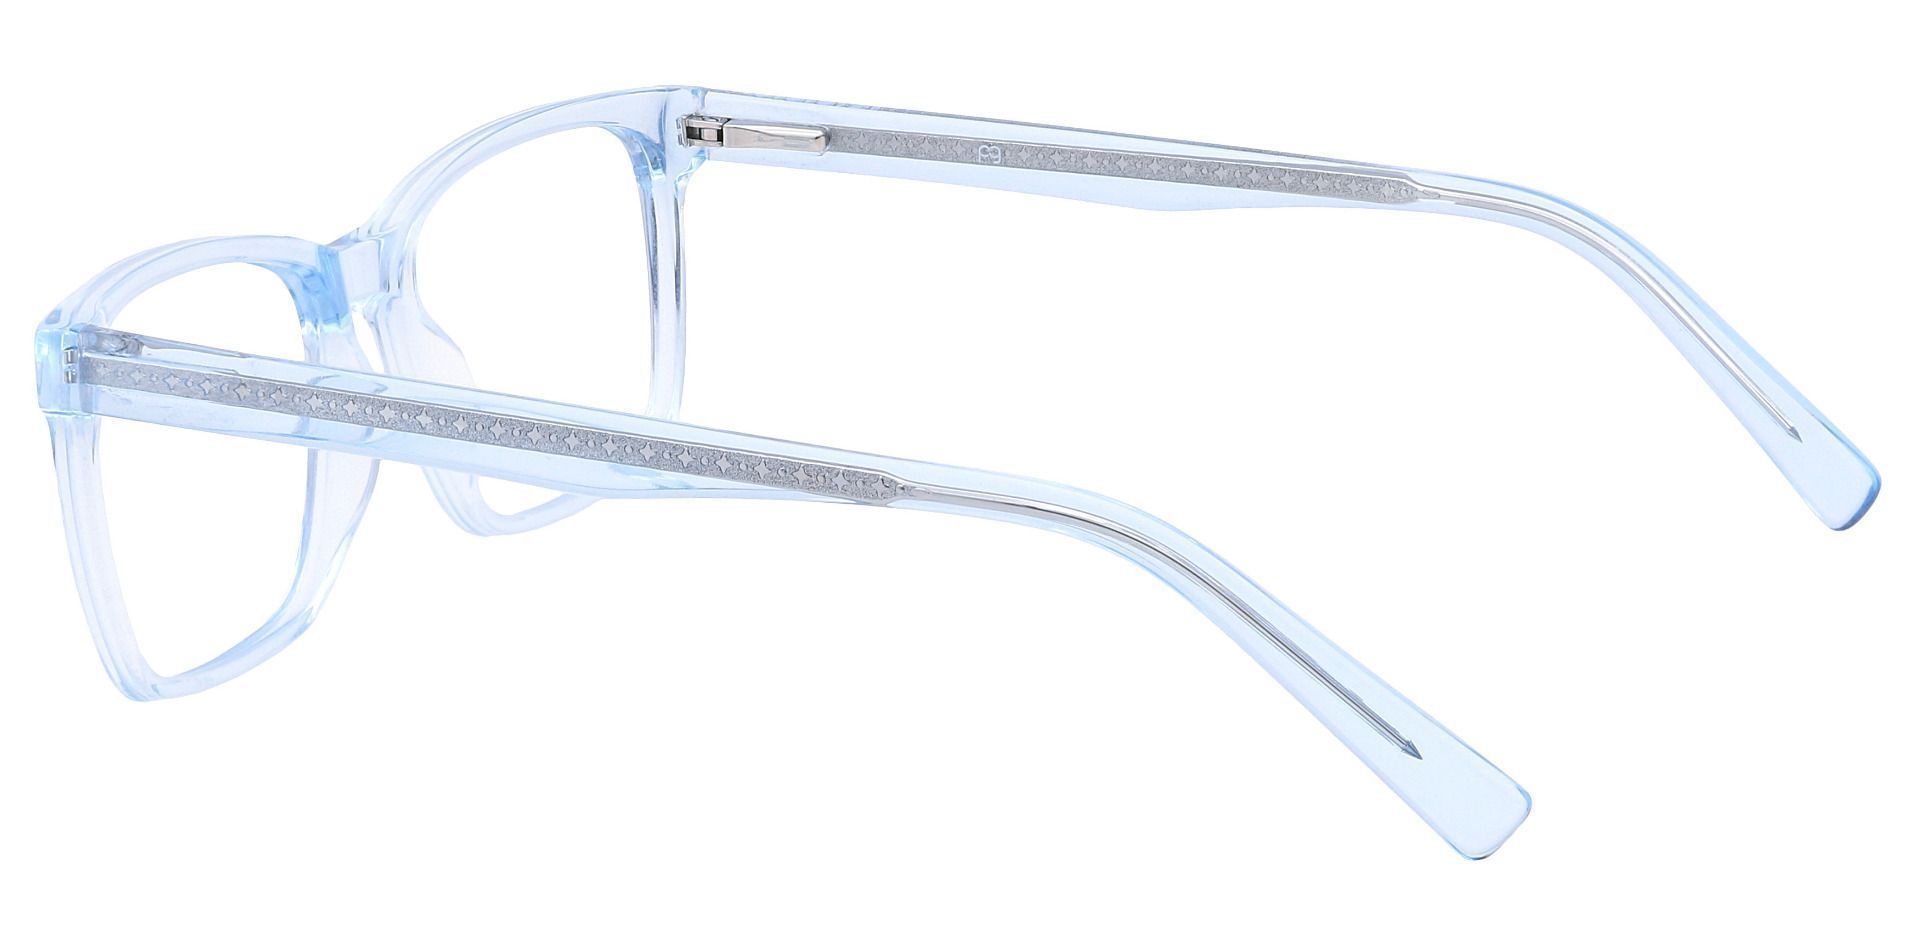 Galaxy Rectangle Reading Glasses - Blue